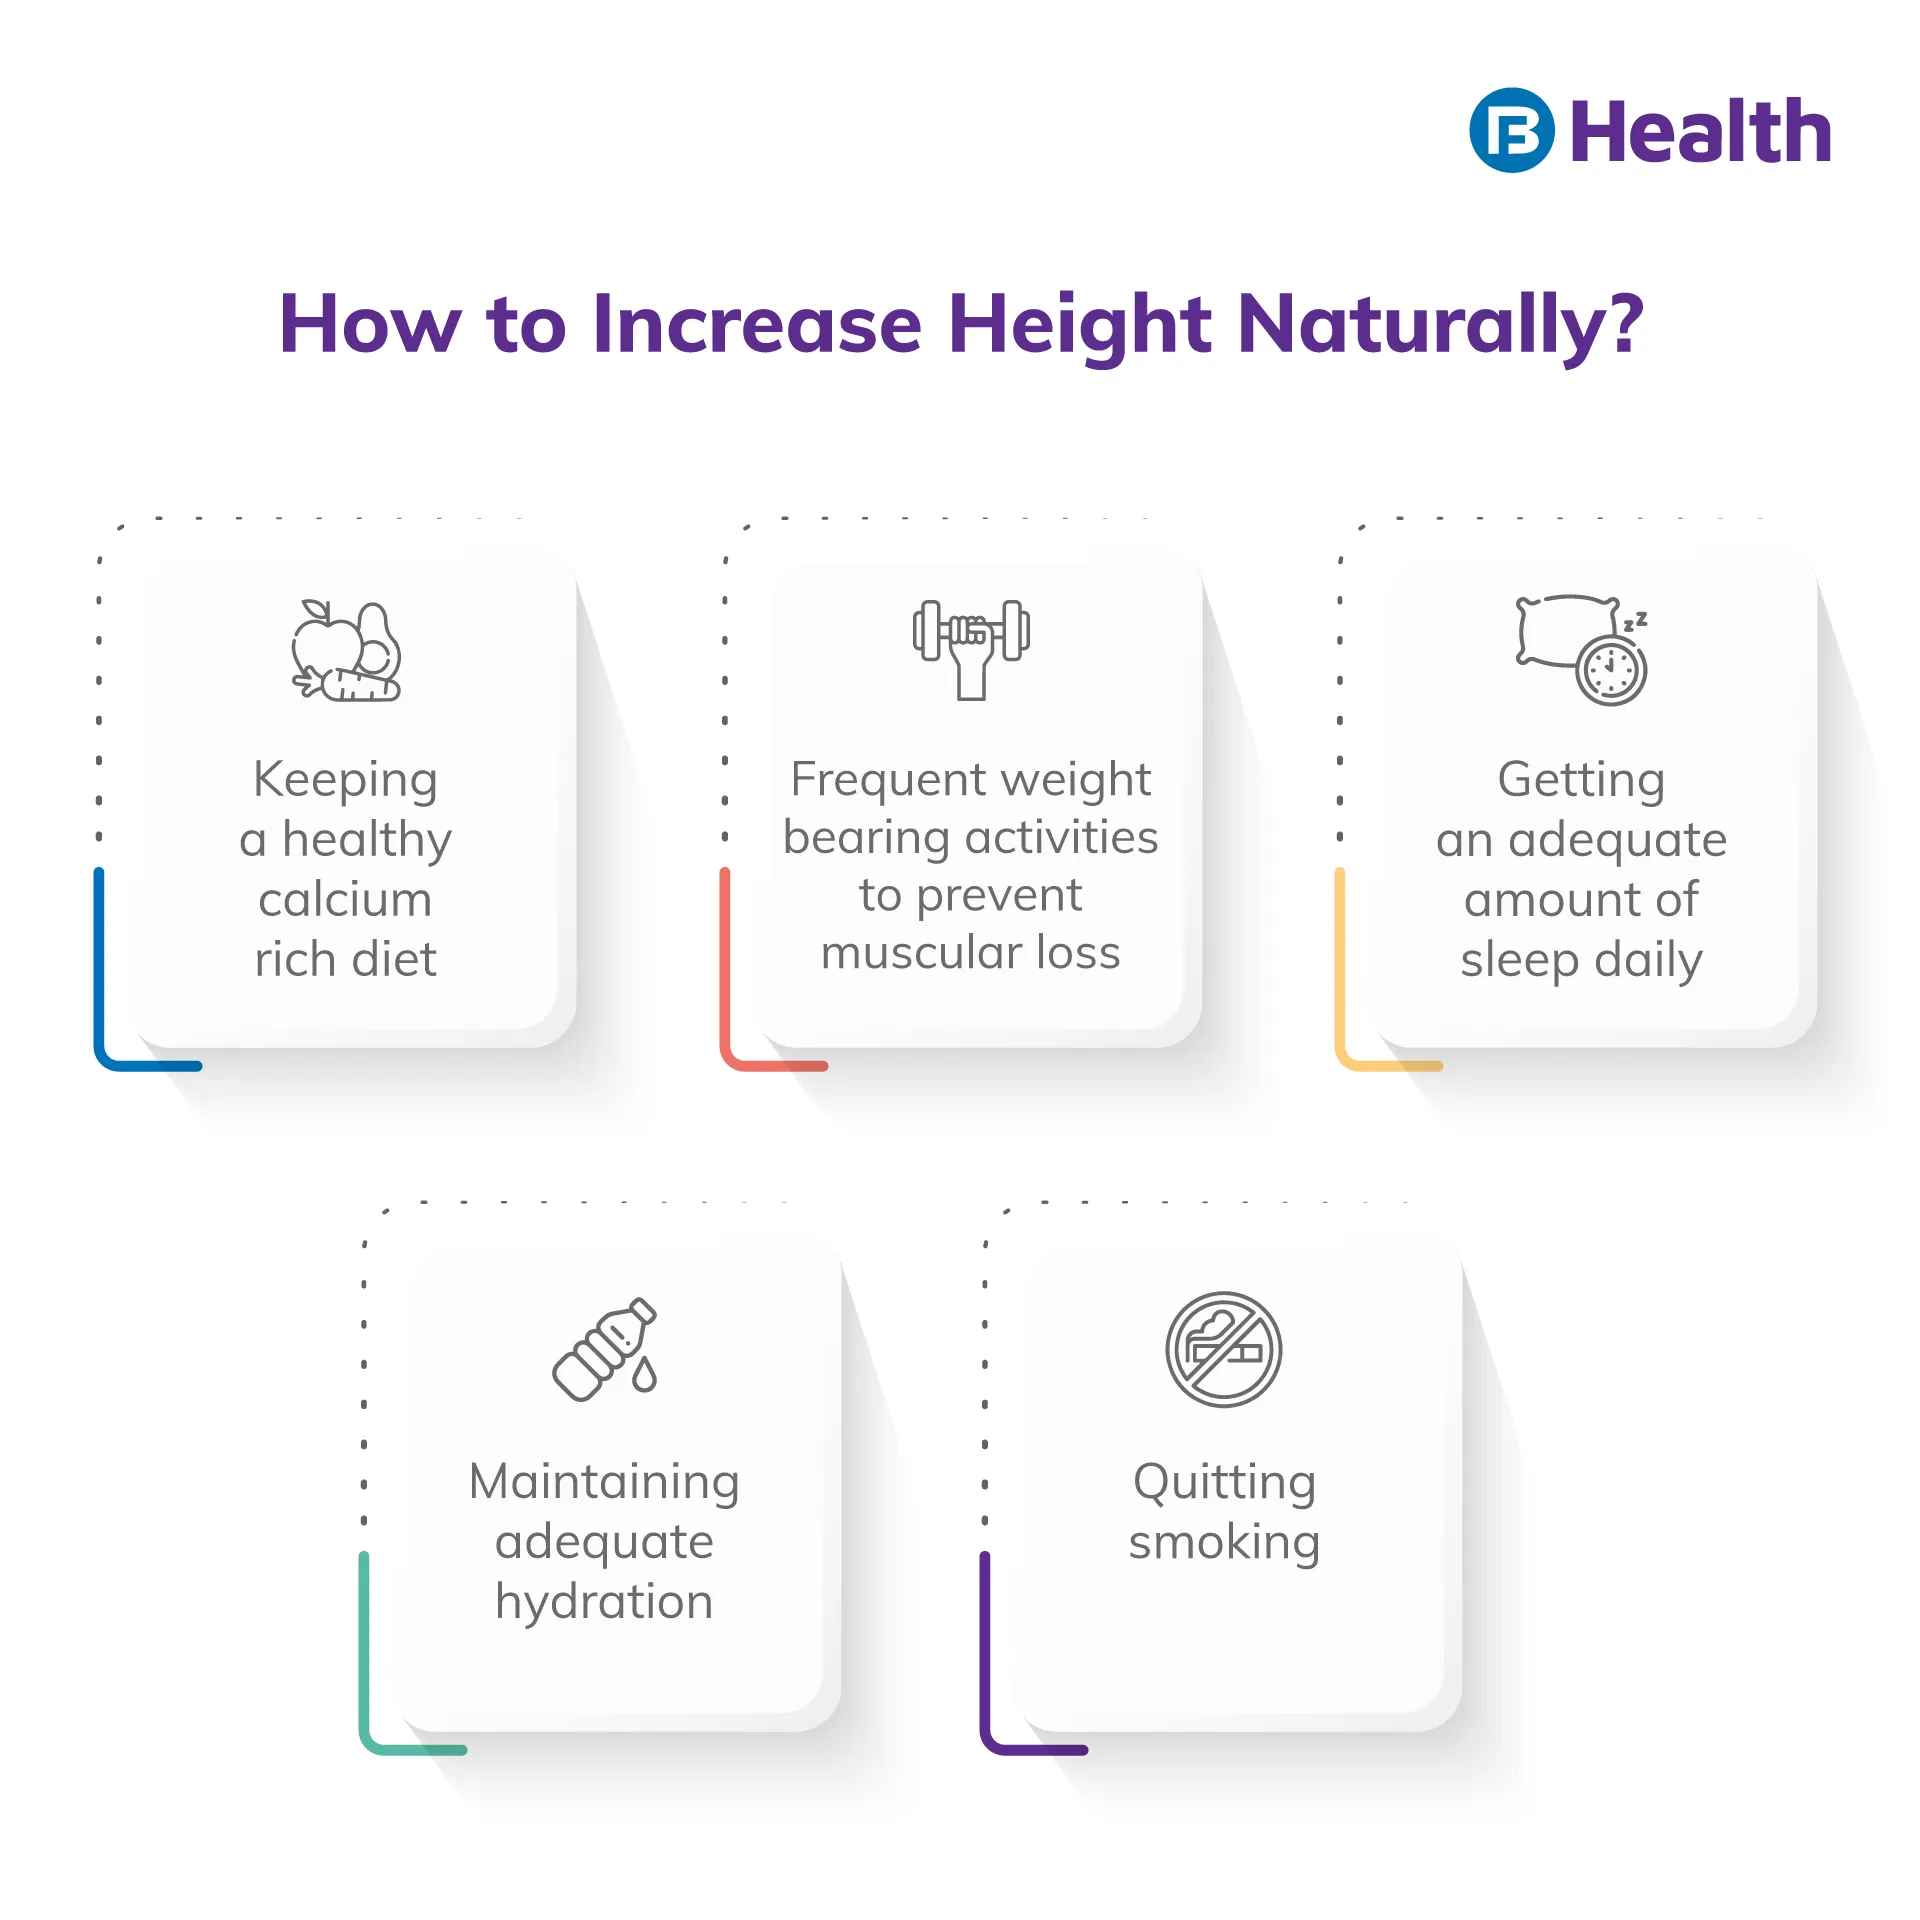 How To Increase Your Height In 5 Minutes (Evidence Based), by Elite Glow